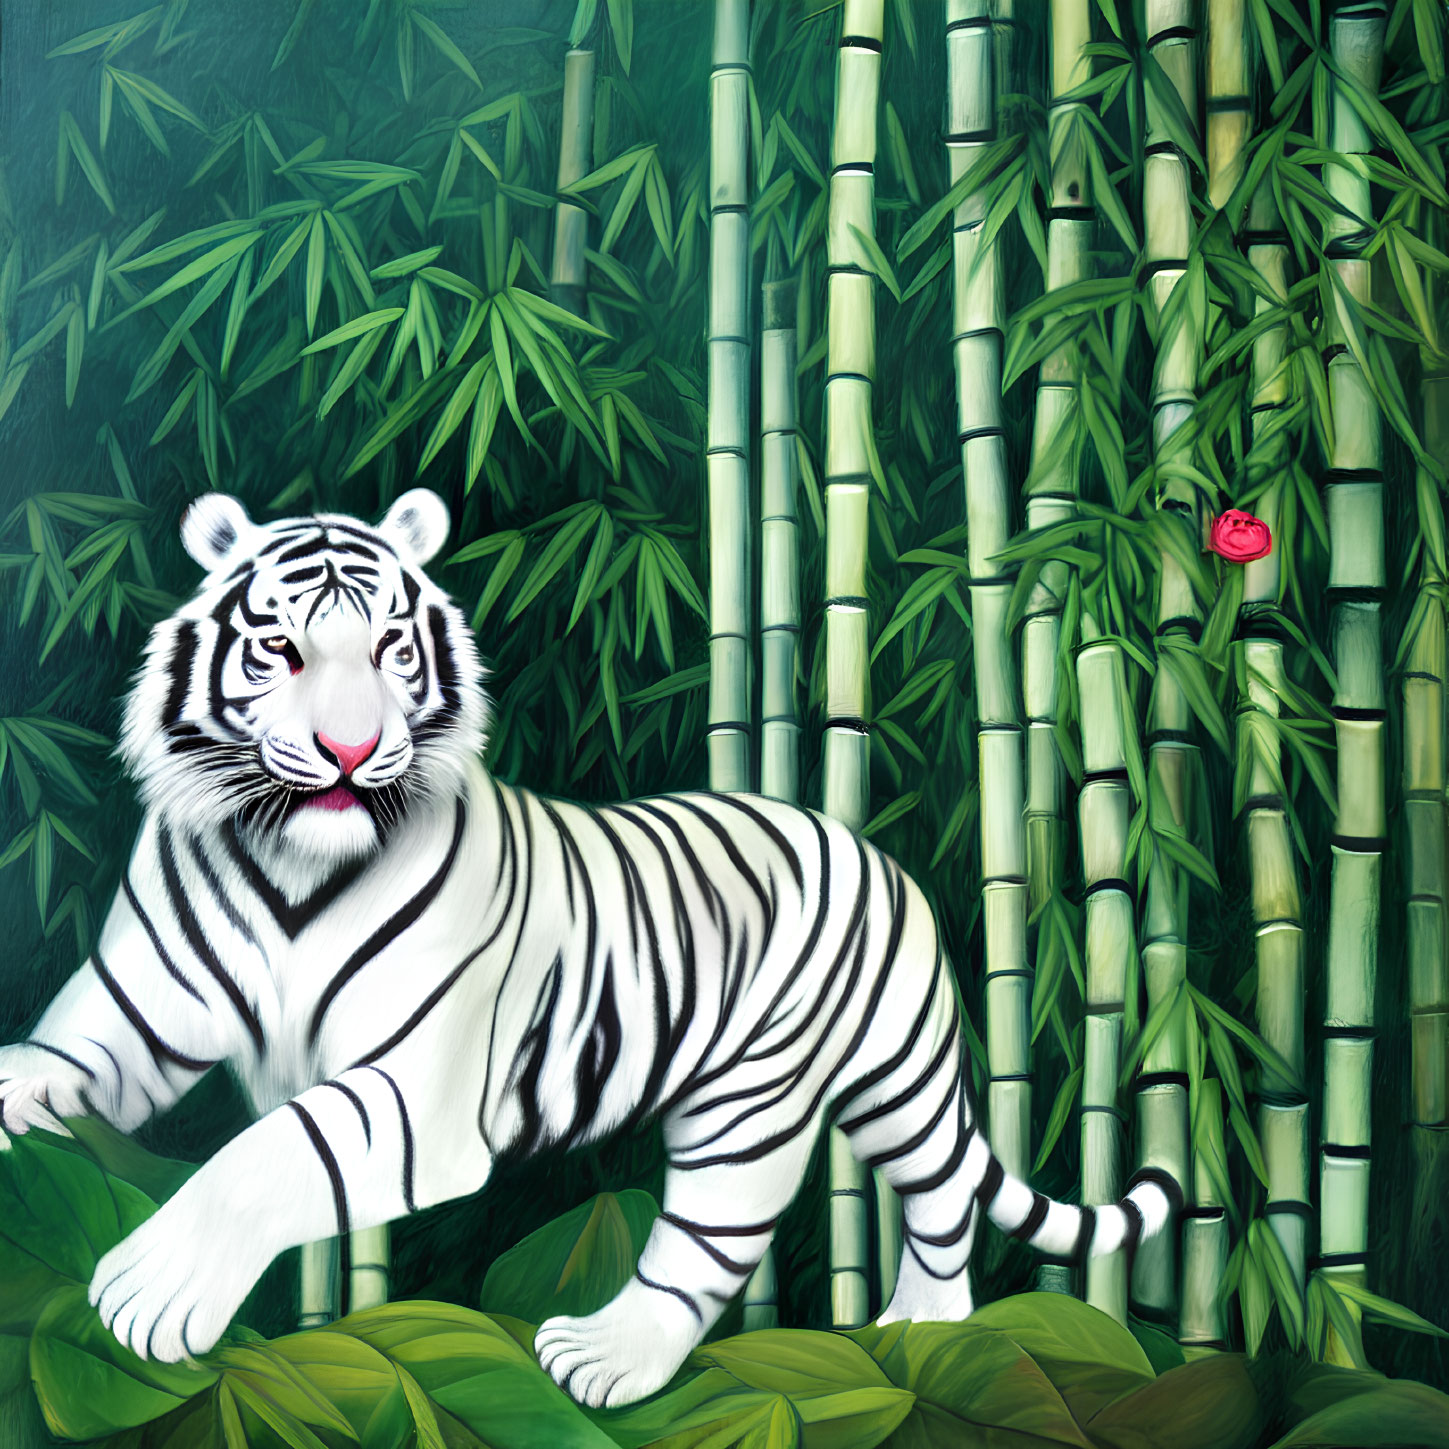 White Tiger Surrounded by Green Bamboo and Rose